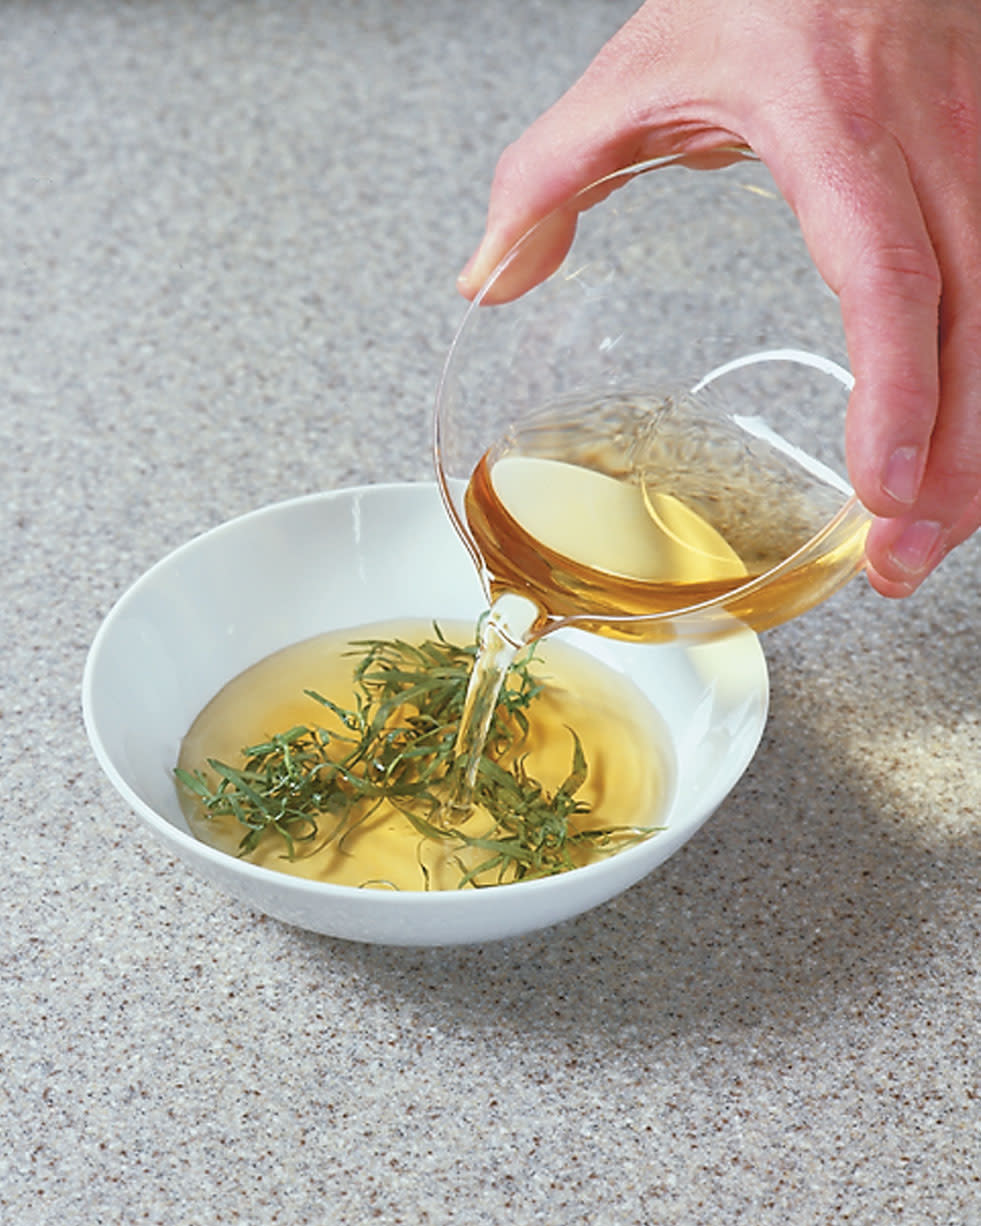 Tips-Preserve-Herbs-by-Making-Flavored-Vinegars